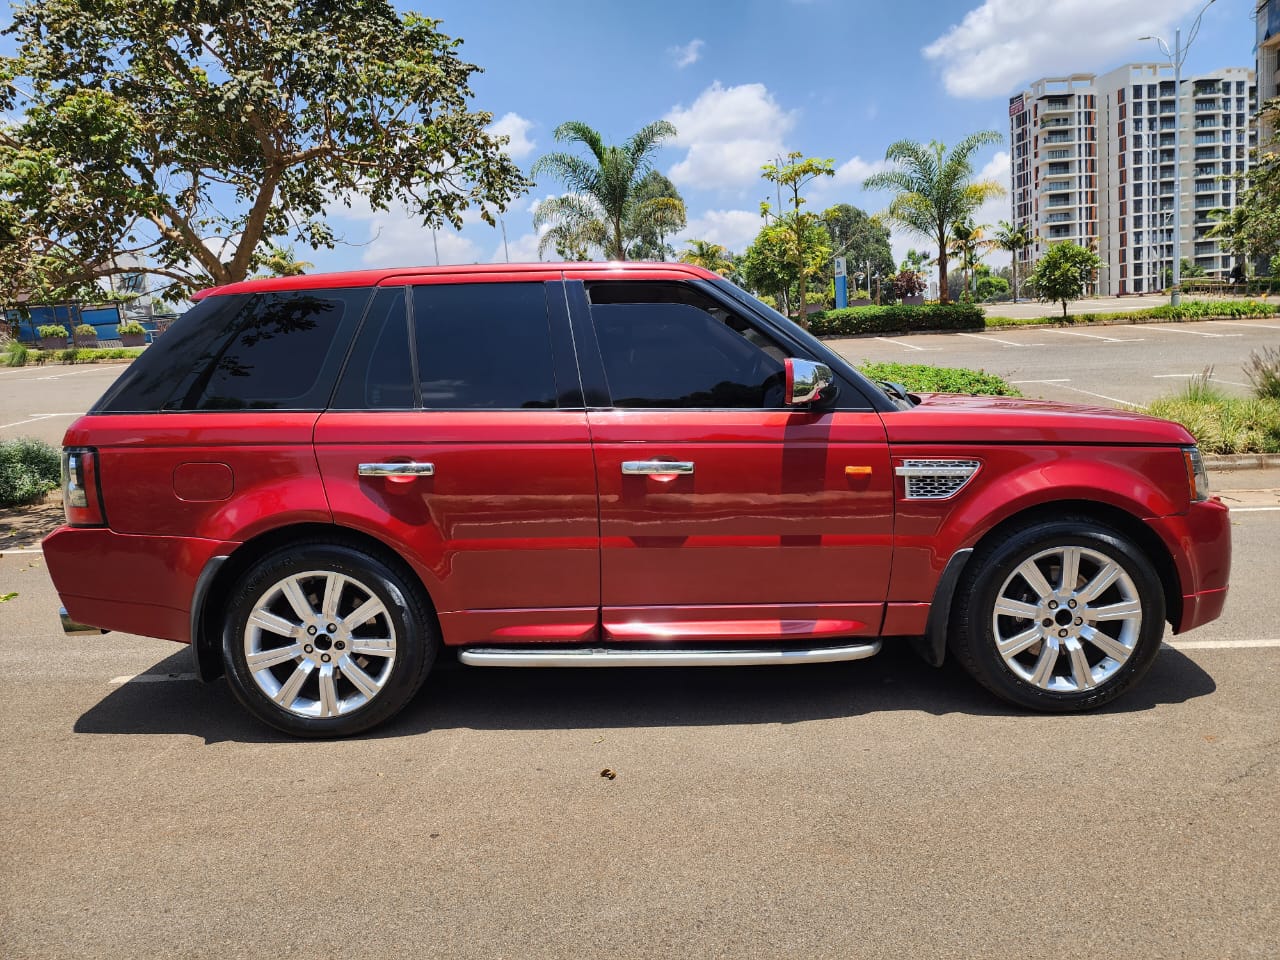 Range Rover Sport SUPERCHARGED petrol You Pay 40% DEPOSIT 70 installments Trade in OK